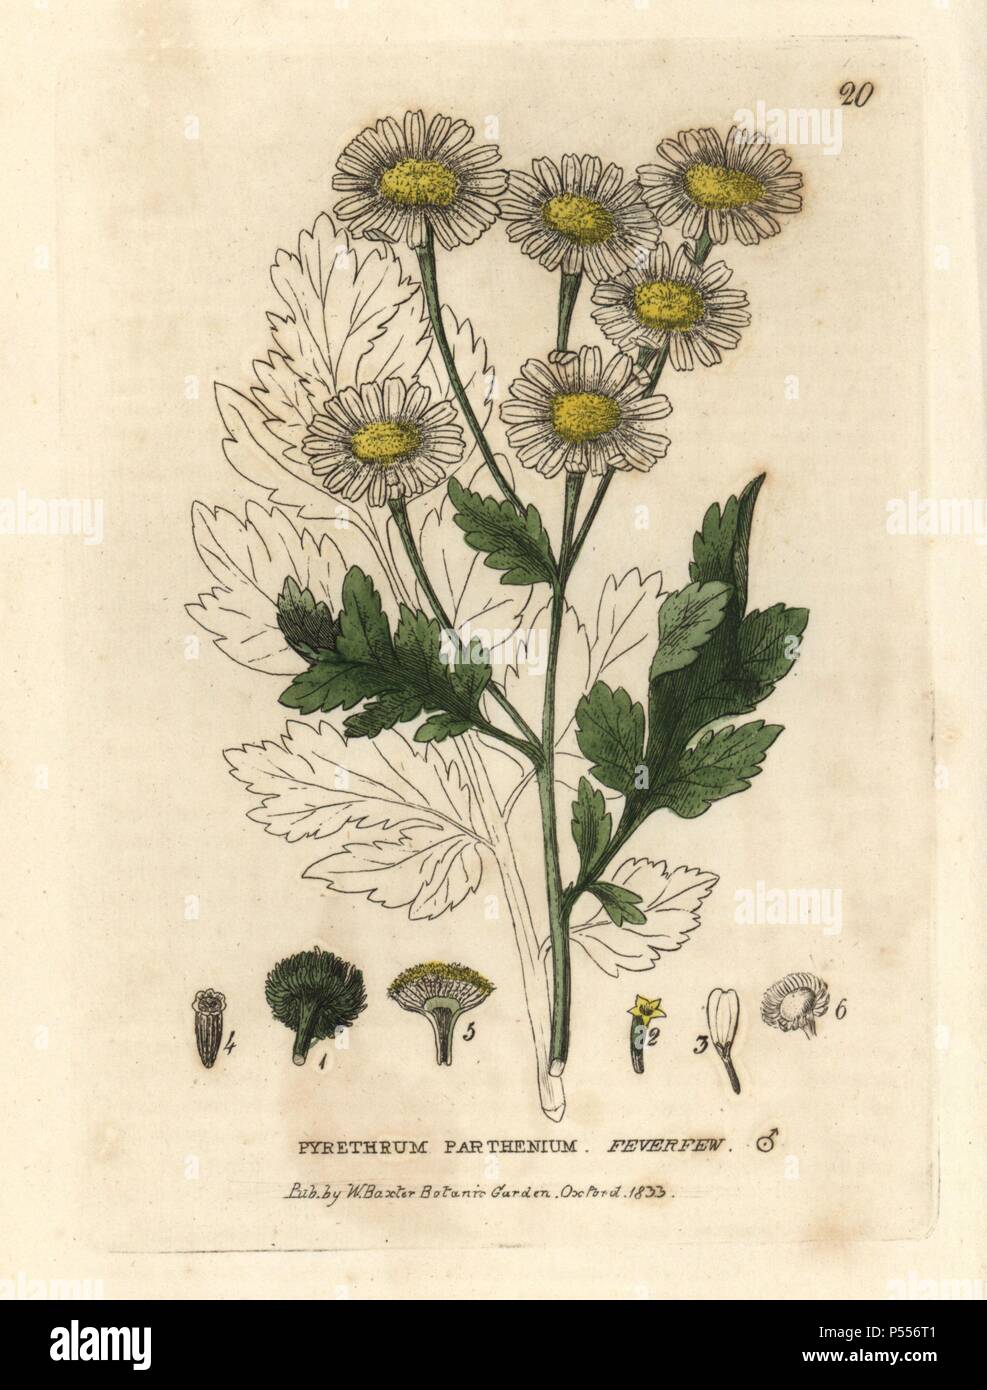 Feverfew, Pyrethrum parthenium. Handcoloured copperplate engraving from a drawing by Isaac Russell from William Baxter's 'British Phaenogamous Botany' 1834. Scotsman William Baxter (1788-1871) was the curator of the Oxford Botanic Garden from 1813 to 1854. Stock Photo